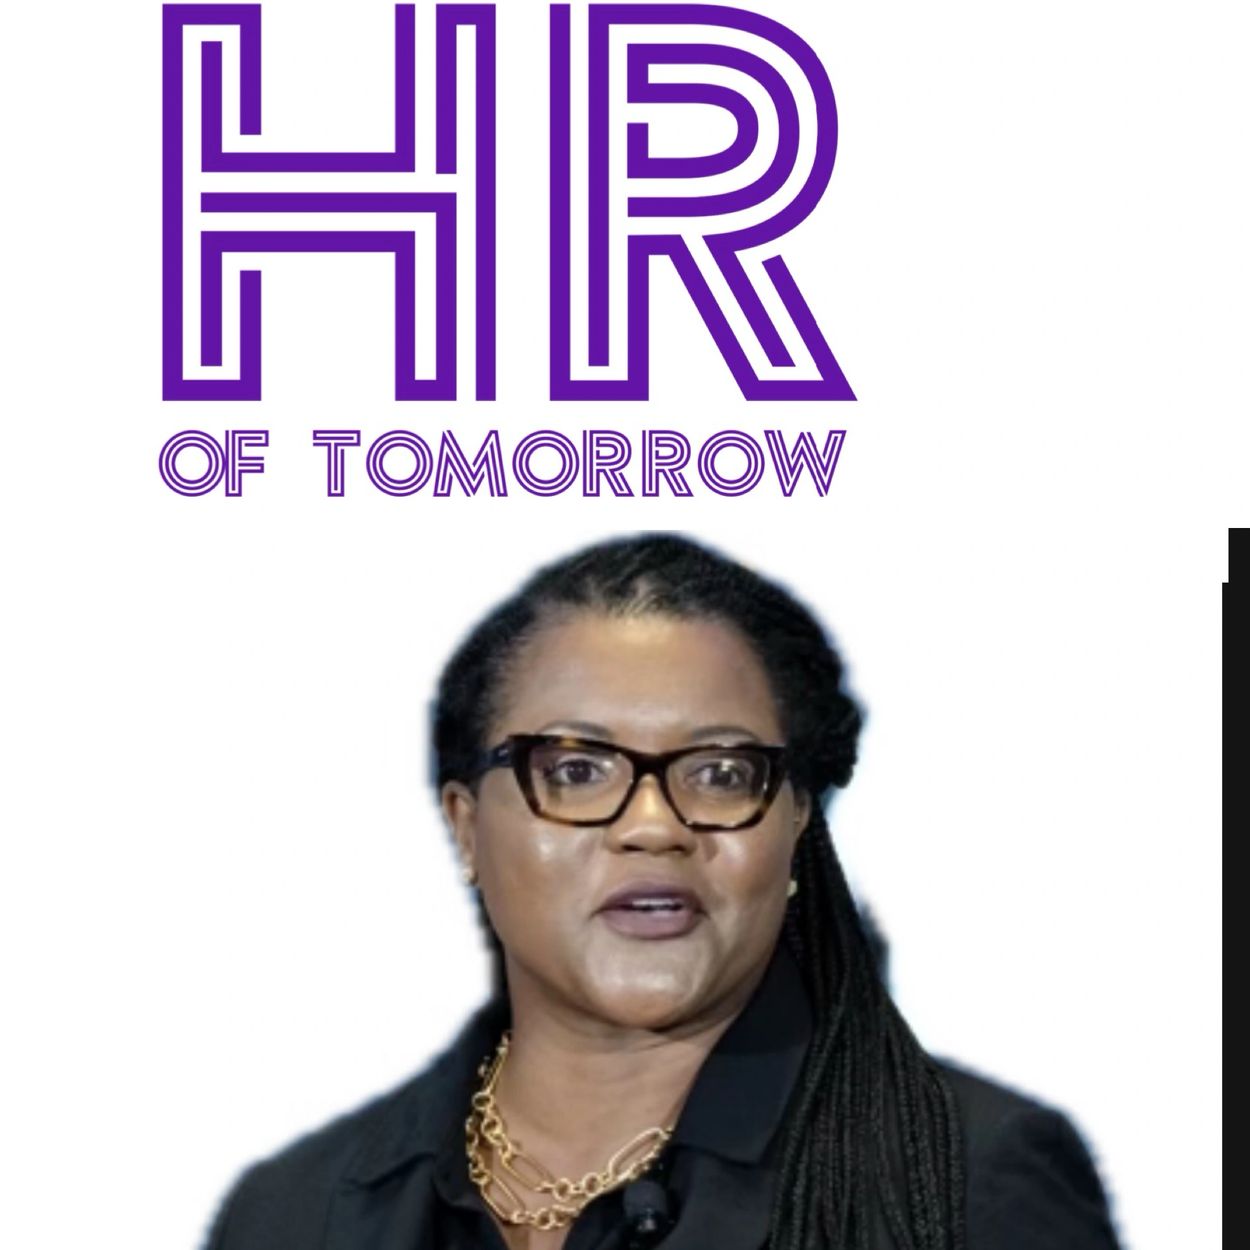 HR of Tomorrow Conference, Paris, France. 30 May 2024 ~ Prioritizing Employee Wellbeing - How Leader